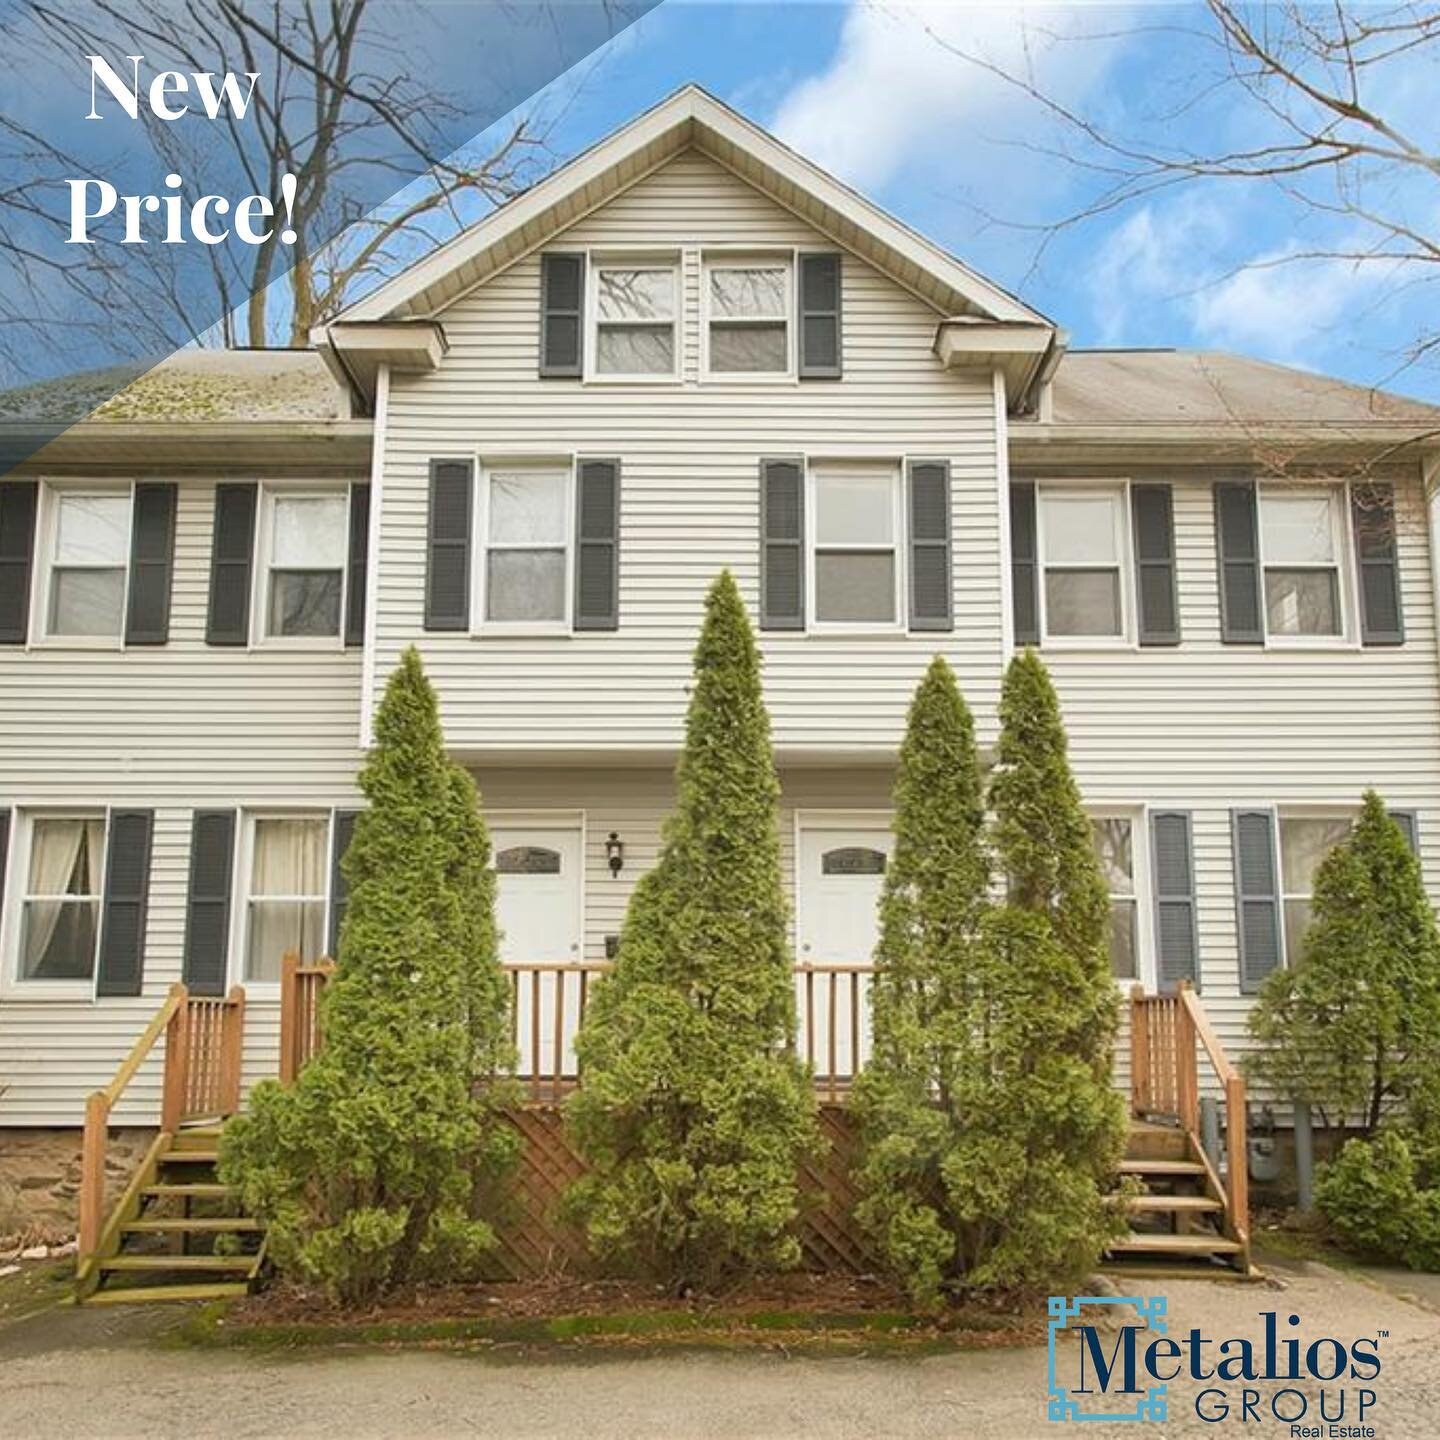 ✨NEW PRICE!✨ 25 Valley Rd, #25 in Greenwich, CT. 

CHIC &amp; MODERN! 3 bed, 4 bath.

Ideally located near shops, restaurants, &amp; school! 

Renovated kitchen, gorgeous hardwood, wide trimmed windows, crown molding give this home lots of character 